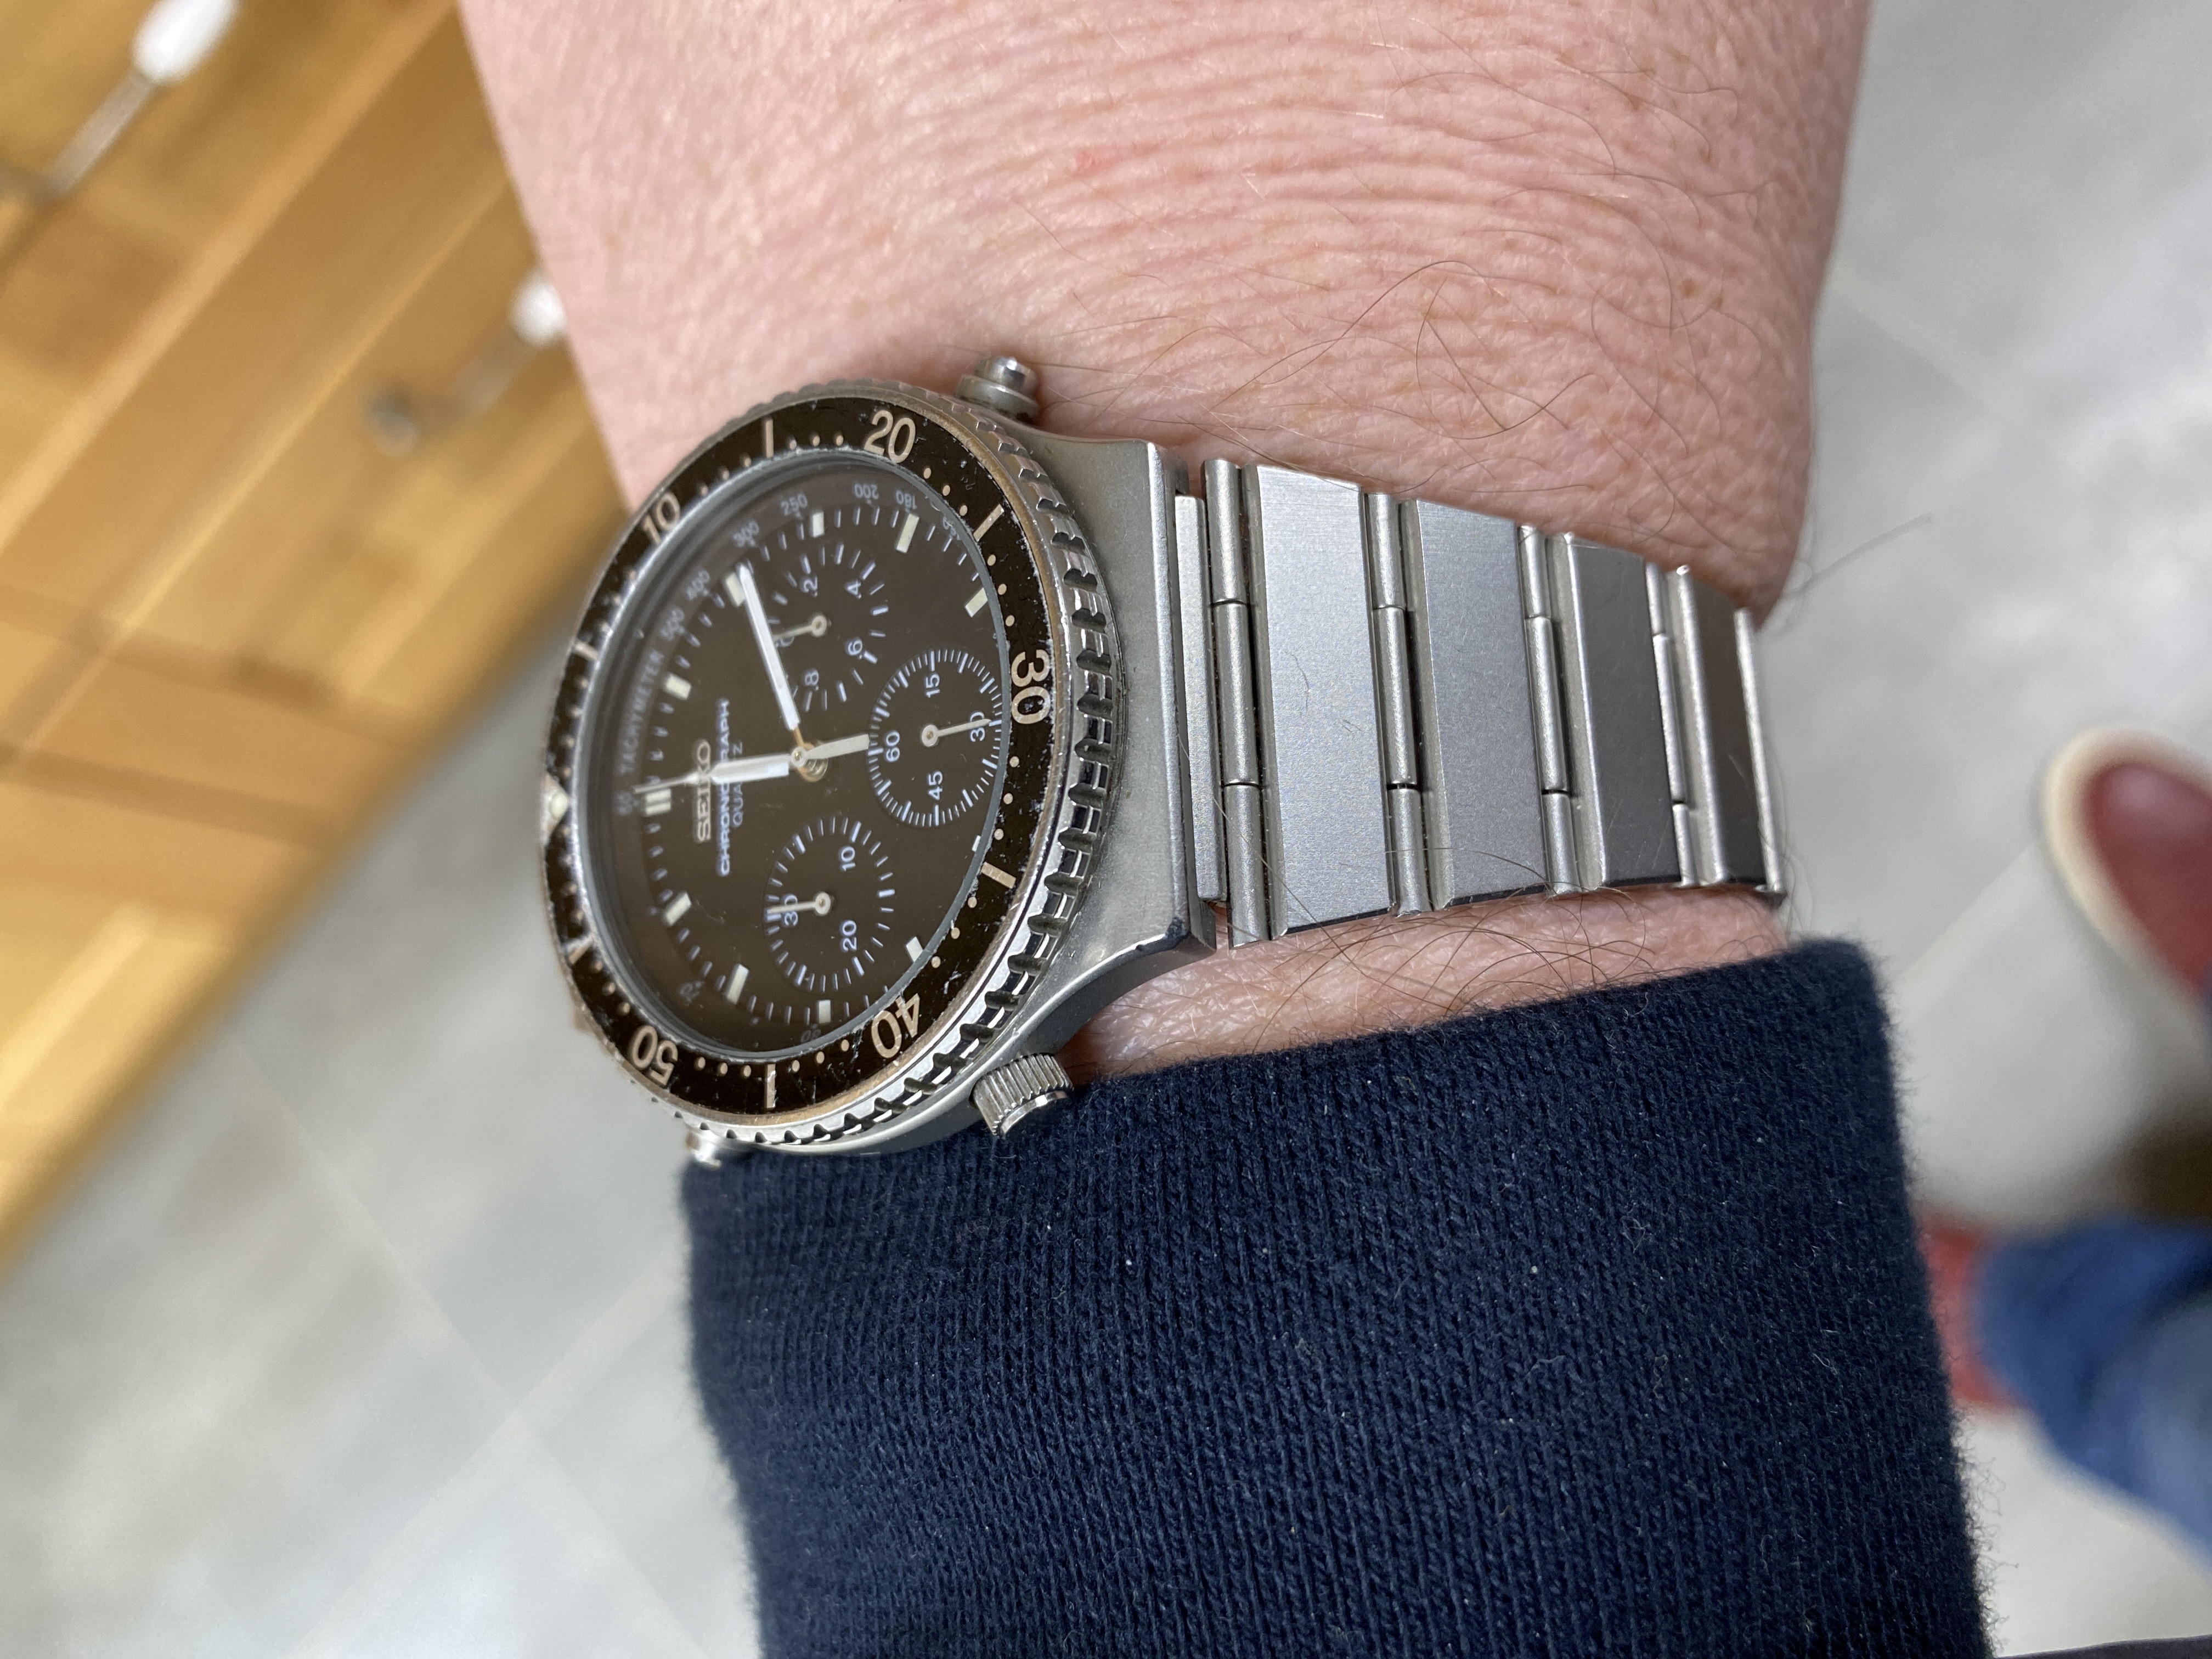 Owner Review: Seiko Chronograph 7A28-7040 - FIFTH WRIST